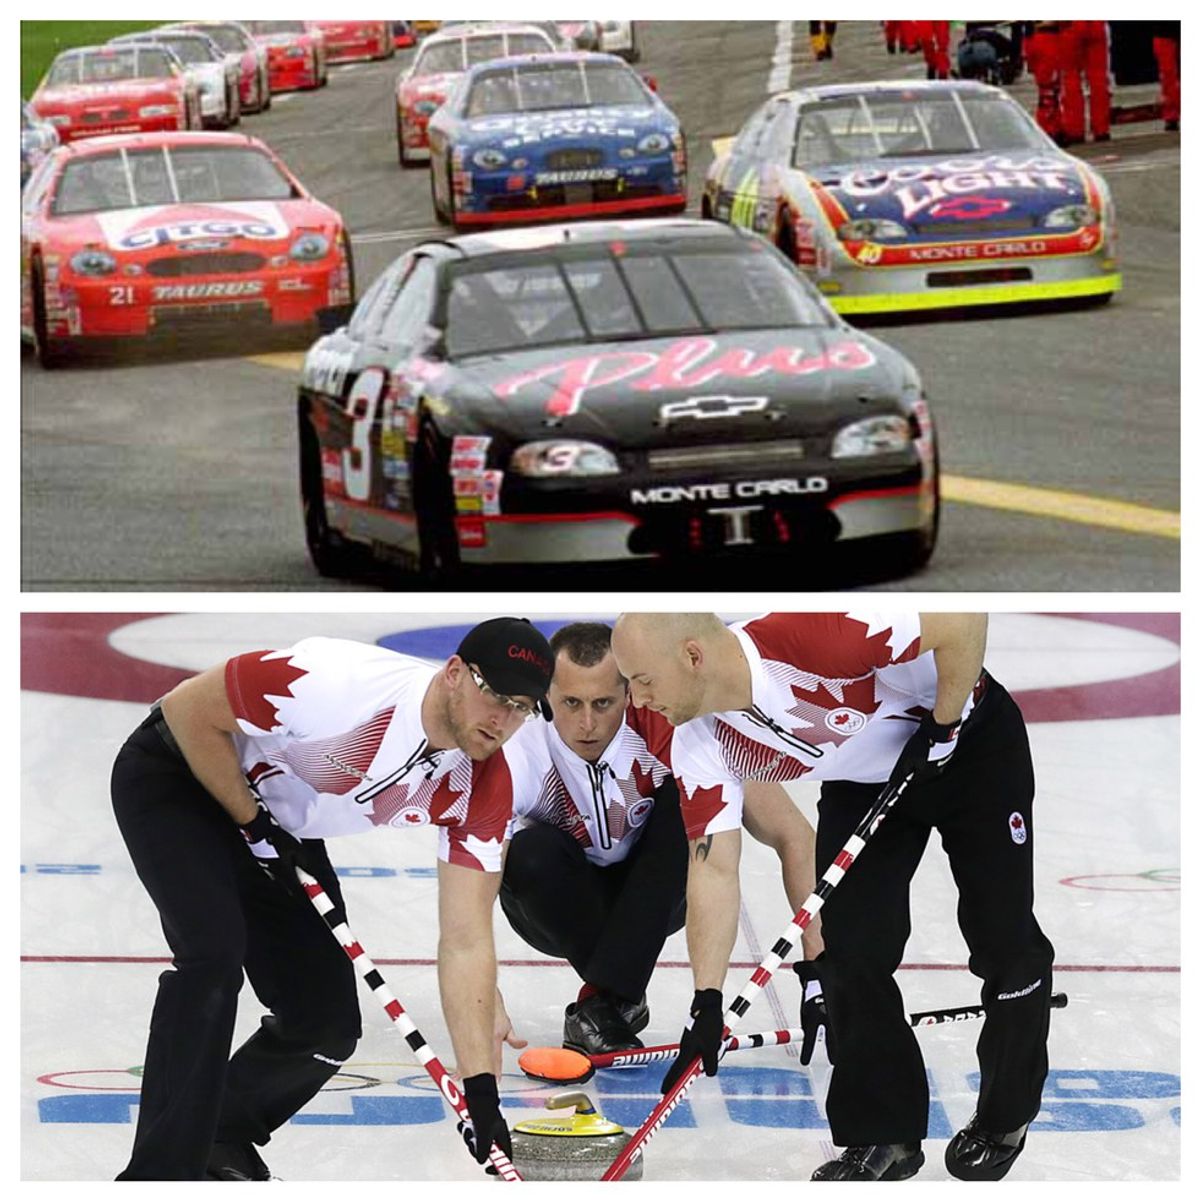 NASCAR Or Curling, Which Is A Real Sport?